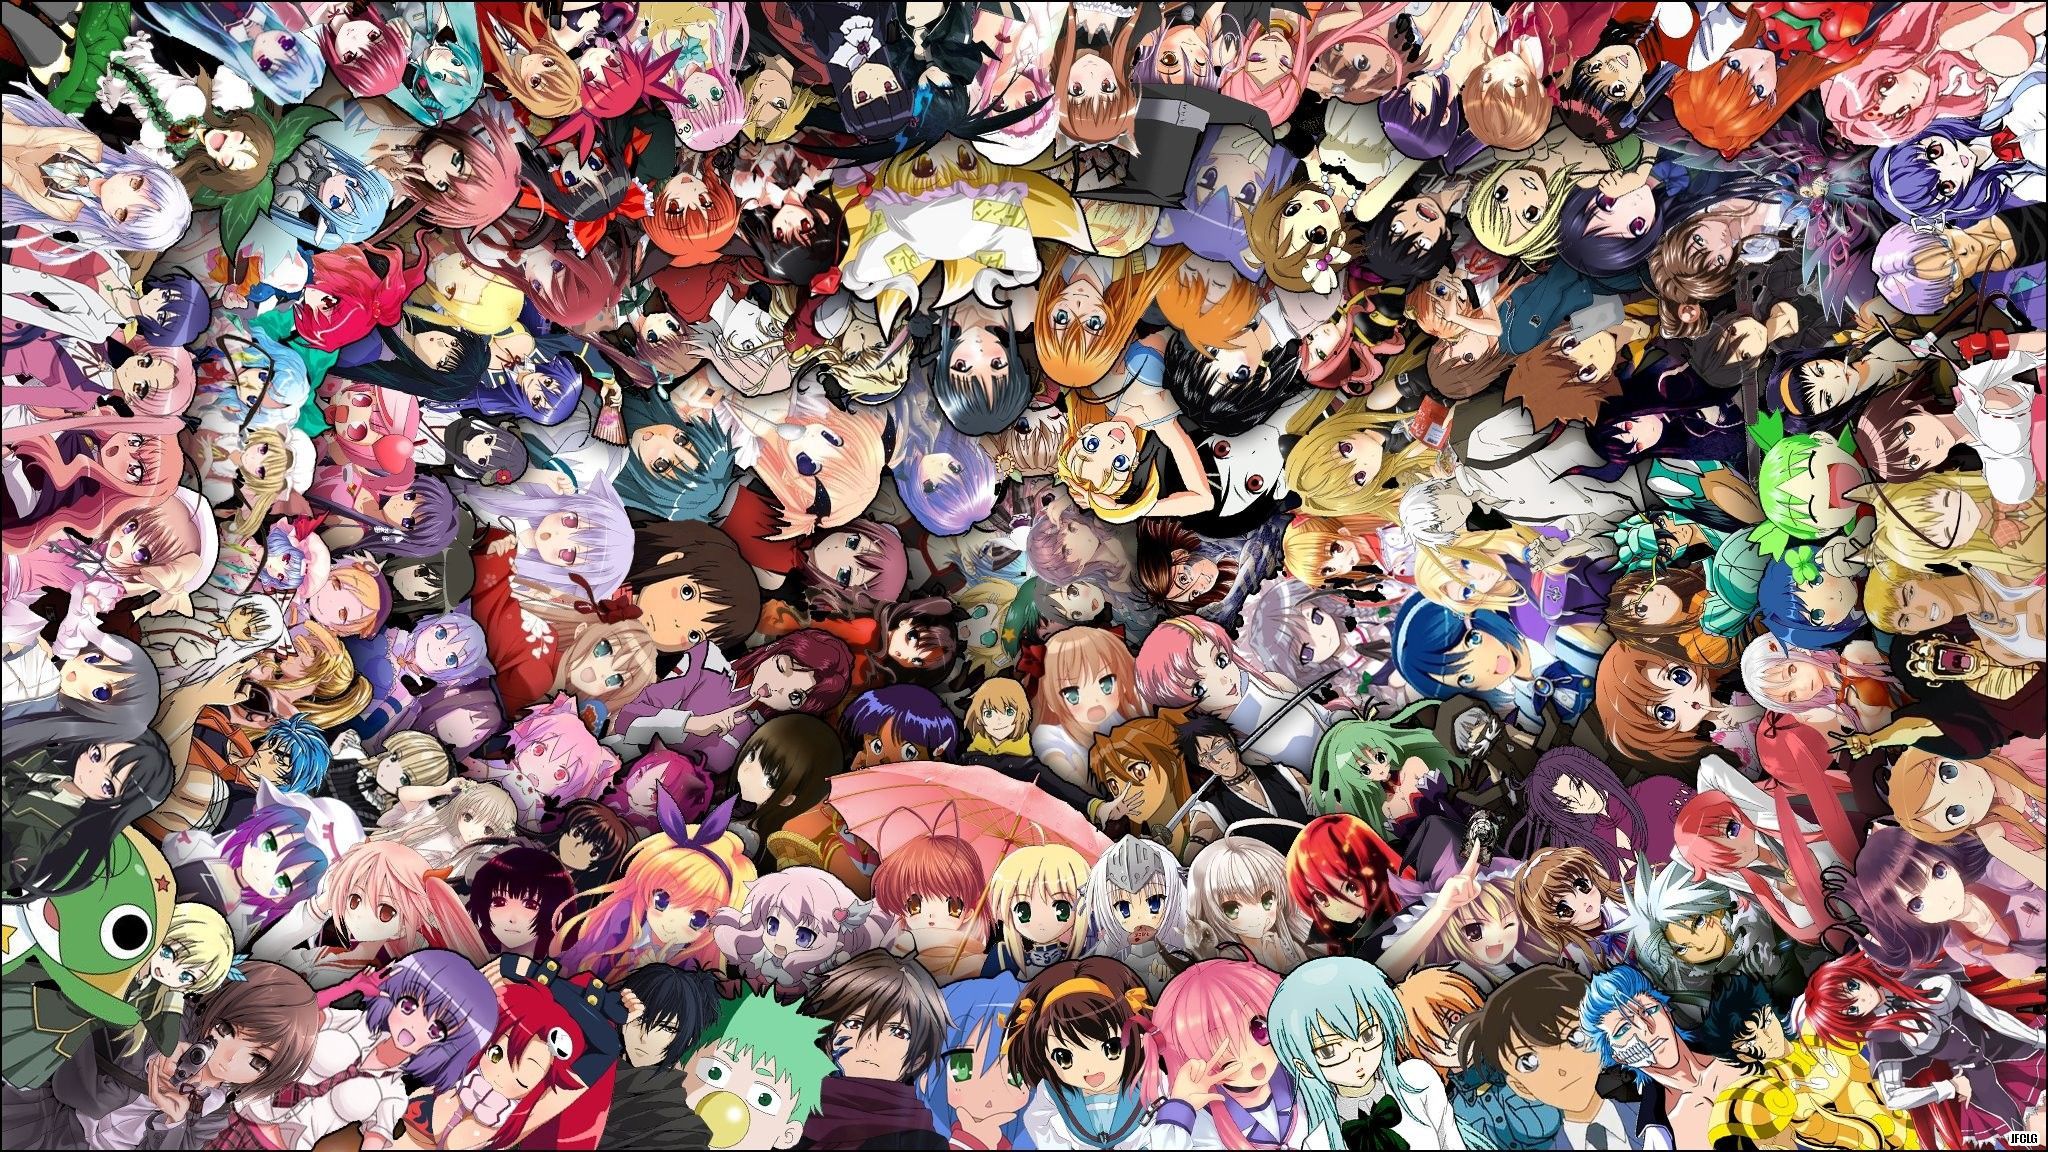 HD Wallpaper. Background. 2048x1152 Anime Crossover. Anime wallpaper, Anime crossover wallpaper, Anime wallpaper background